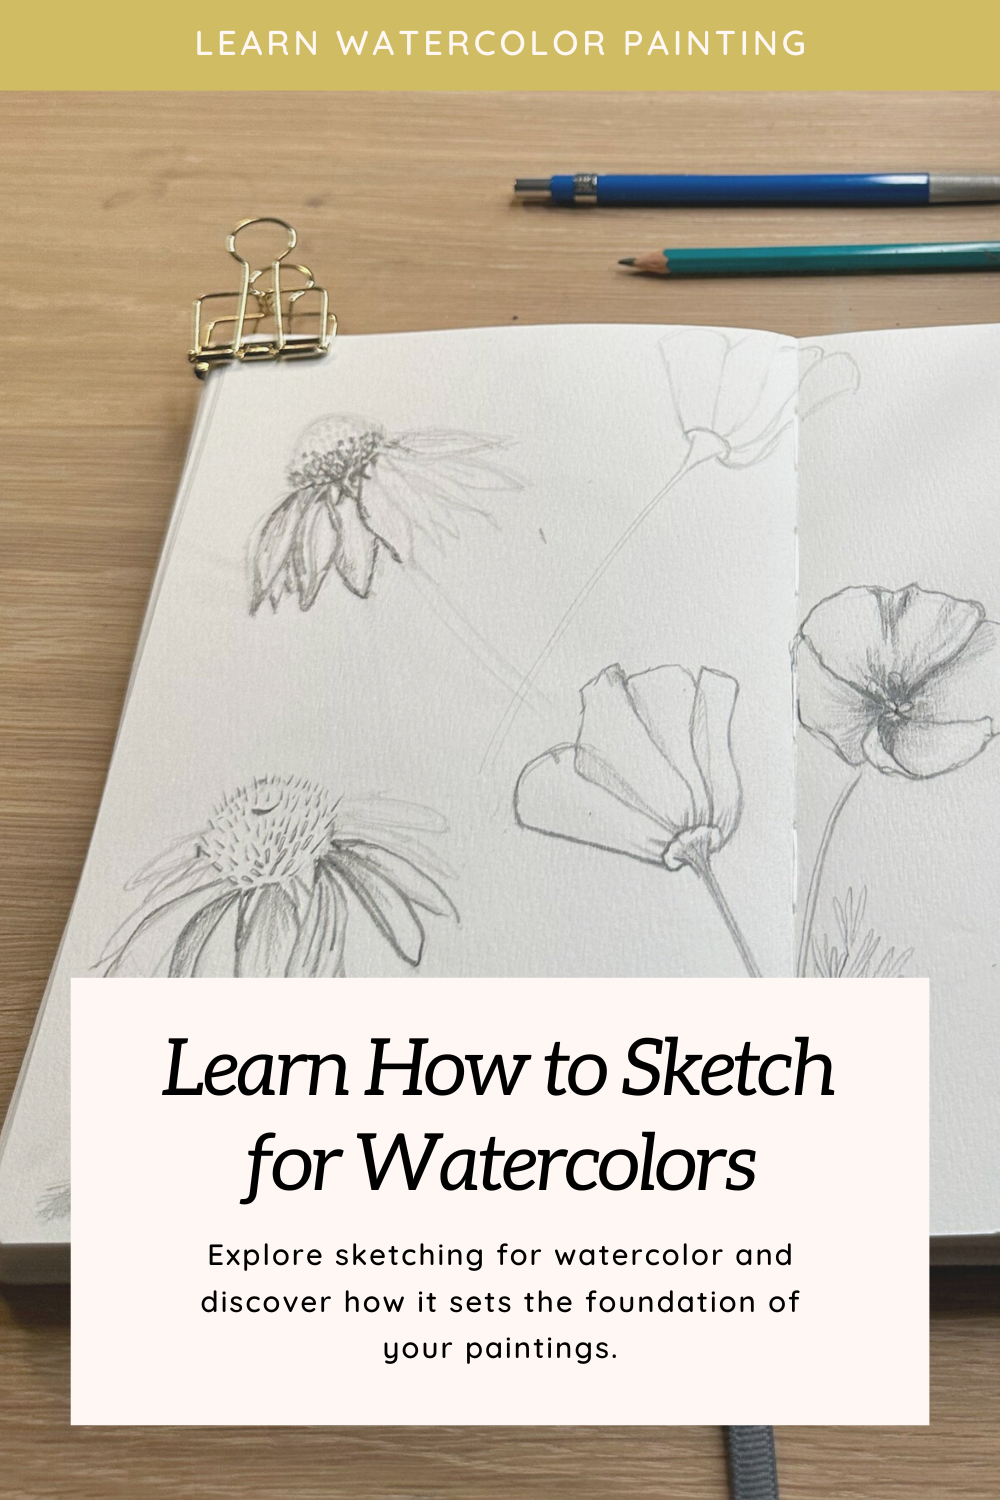 What are some pictures to sketch for beginners? - Quora